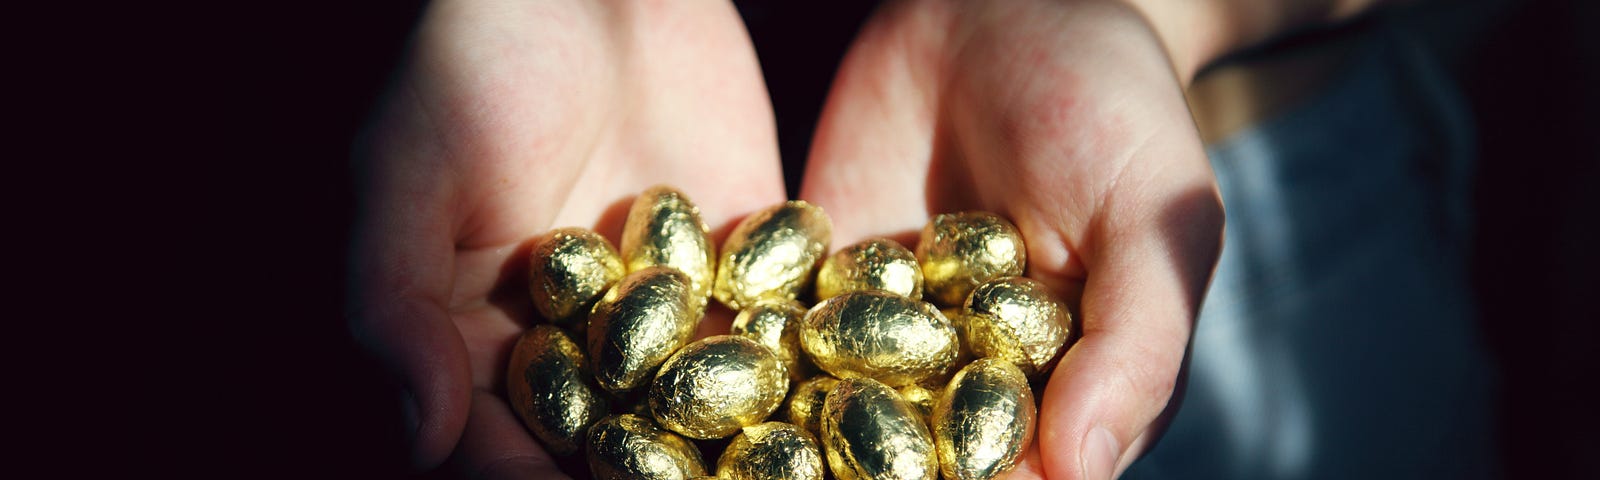 Two cupped handfuls of gold-wrapped chocolate eggs as if holding golden eggs.